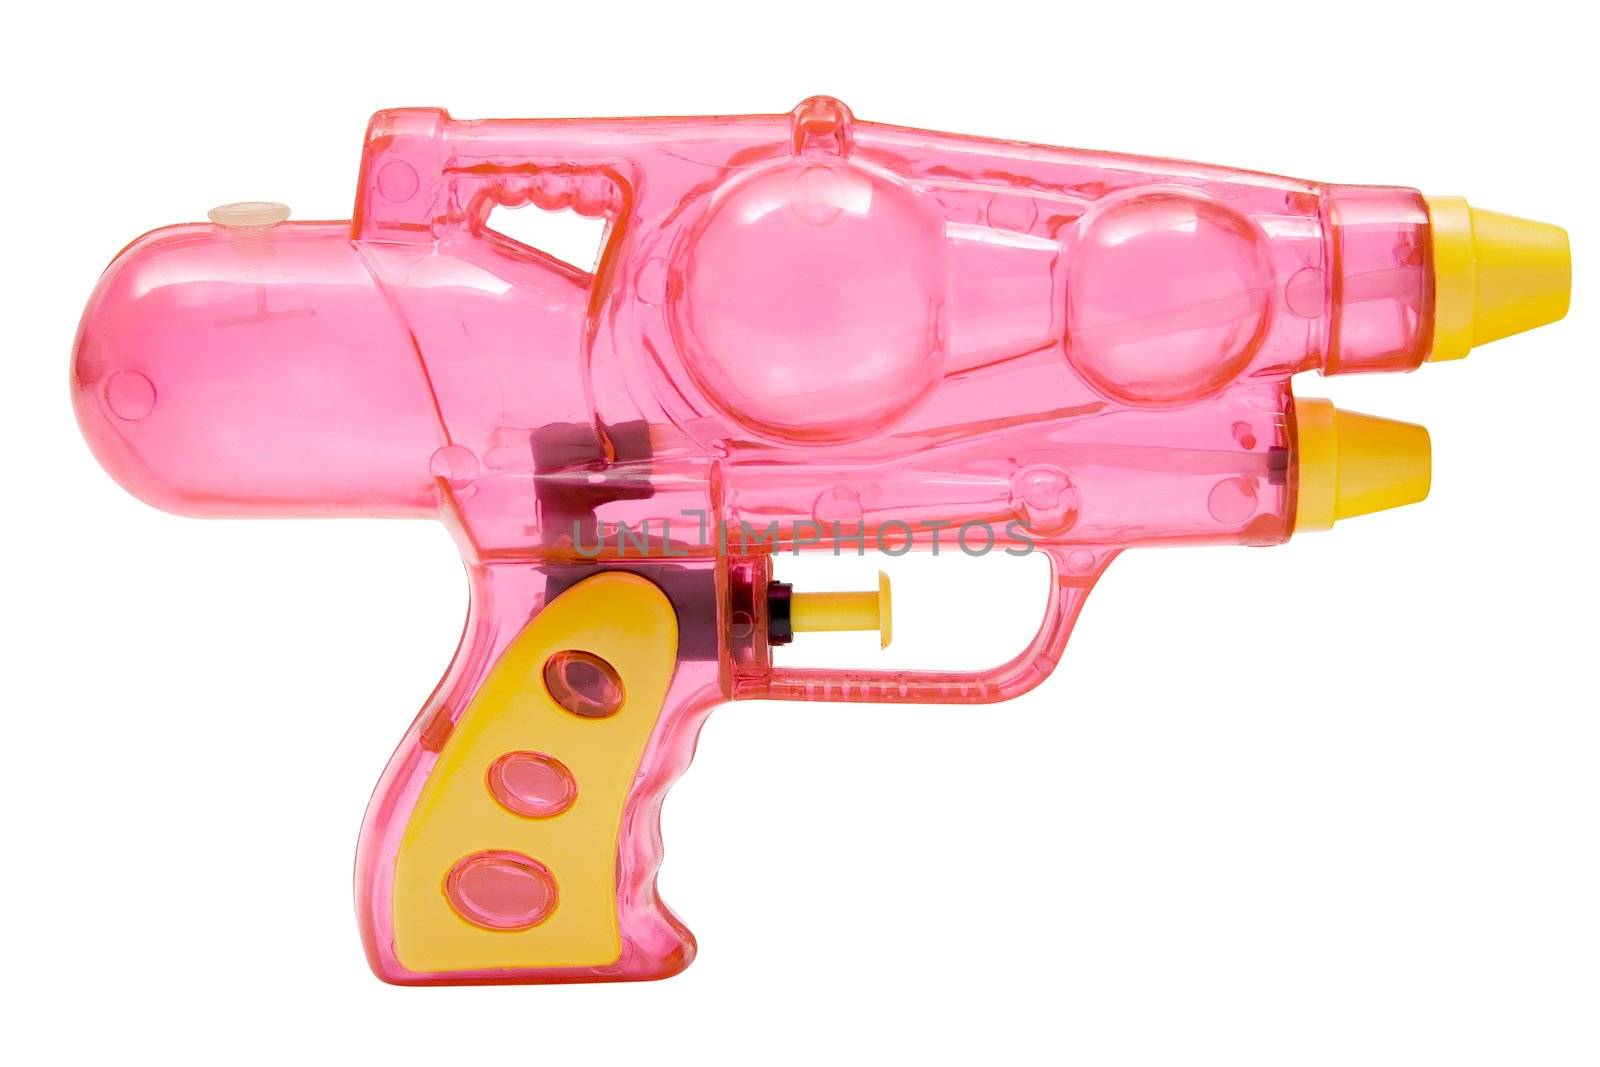 Plastic water pistol isolated on a white background.